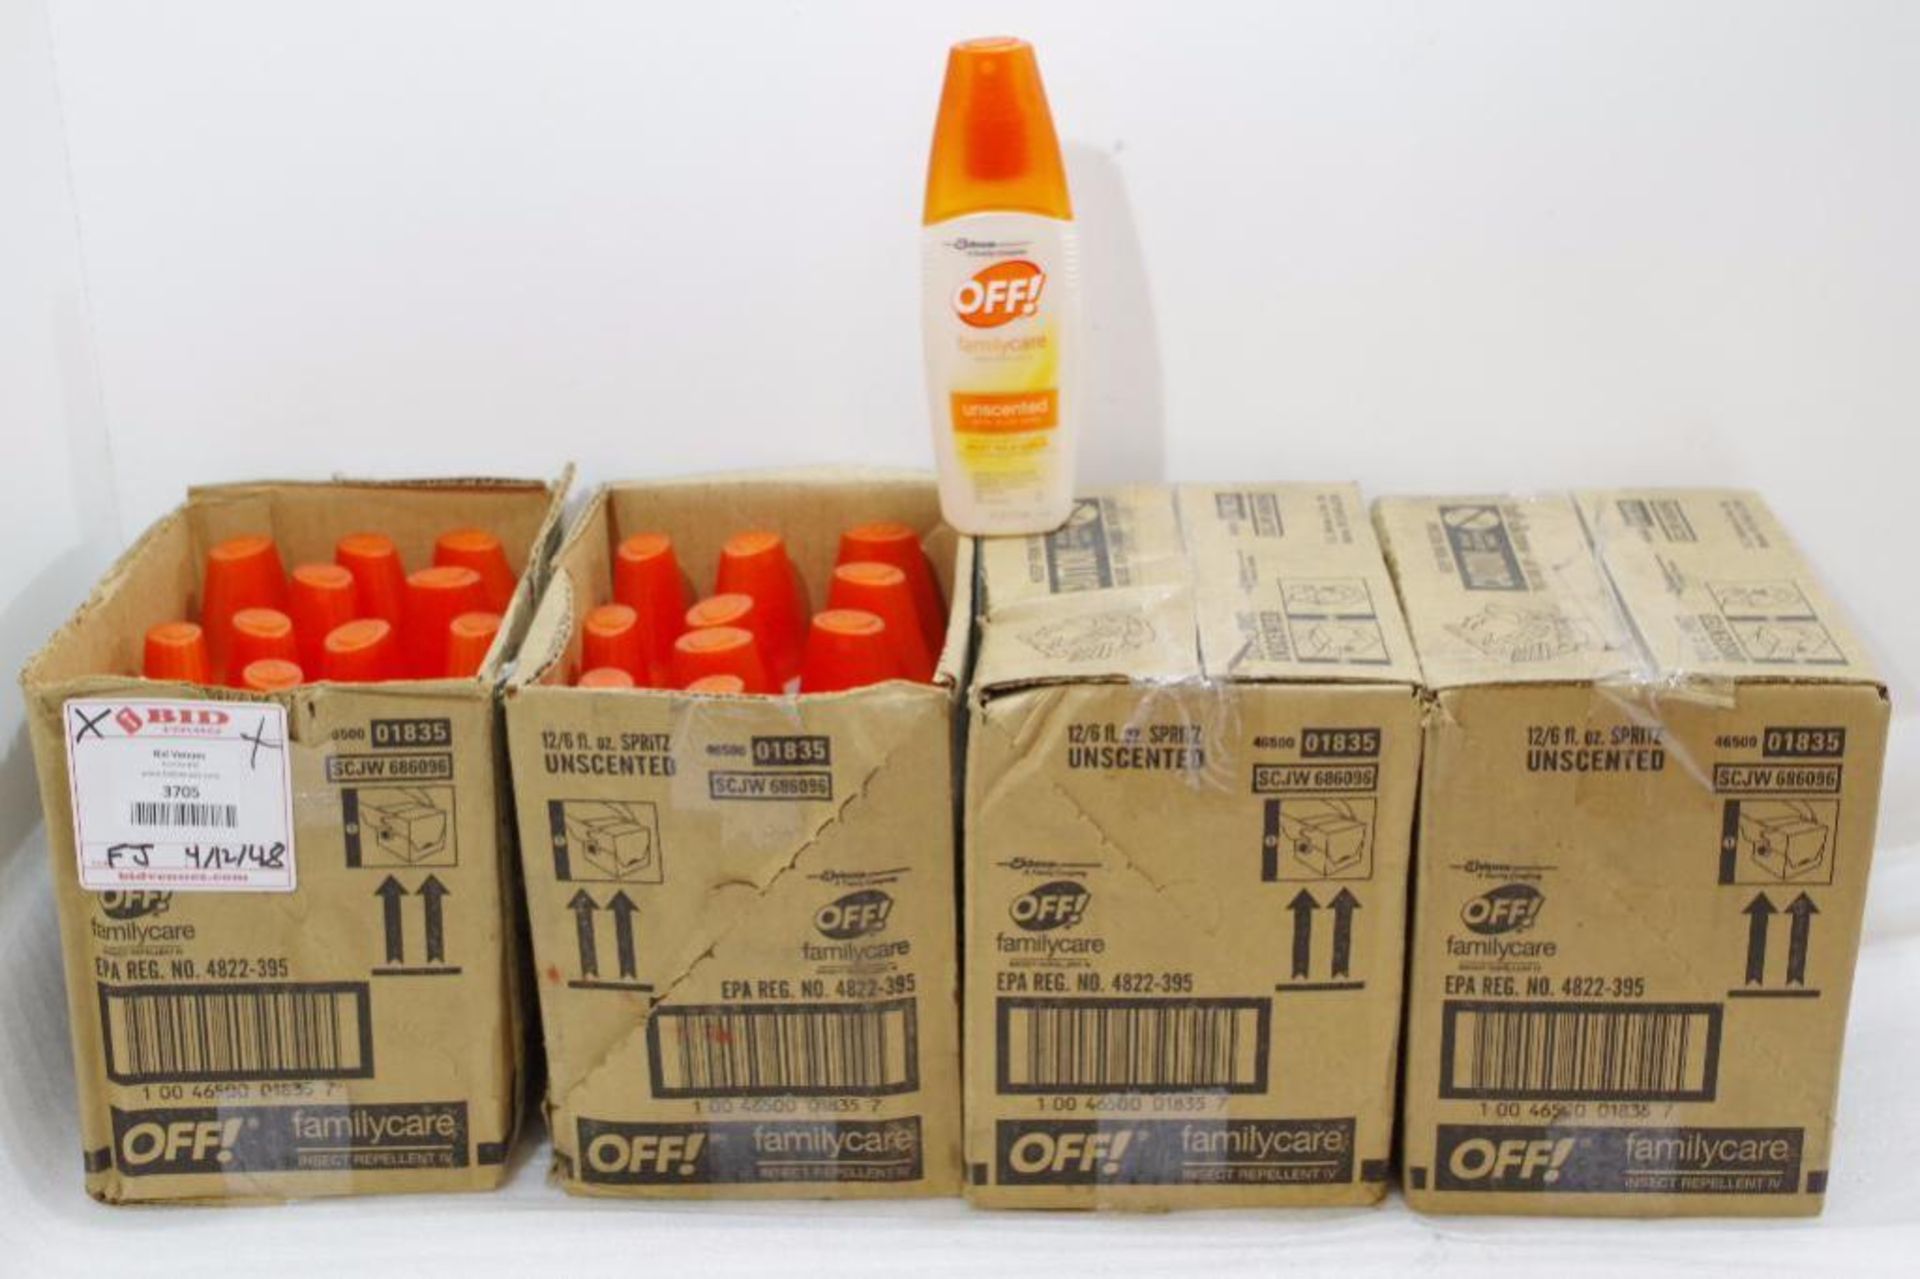 [48] Bottles OFF Insect Repellent, 6-Fl. oz., Spritz, Unscented (4 Boxes of 12 Each) - Image 2 of 3